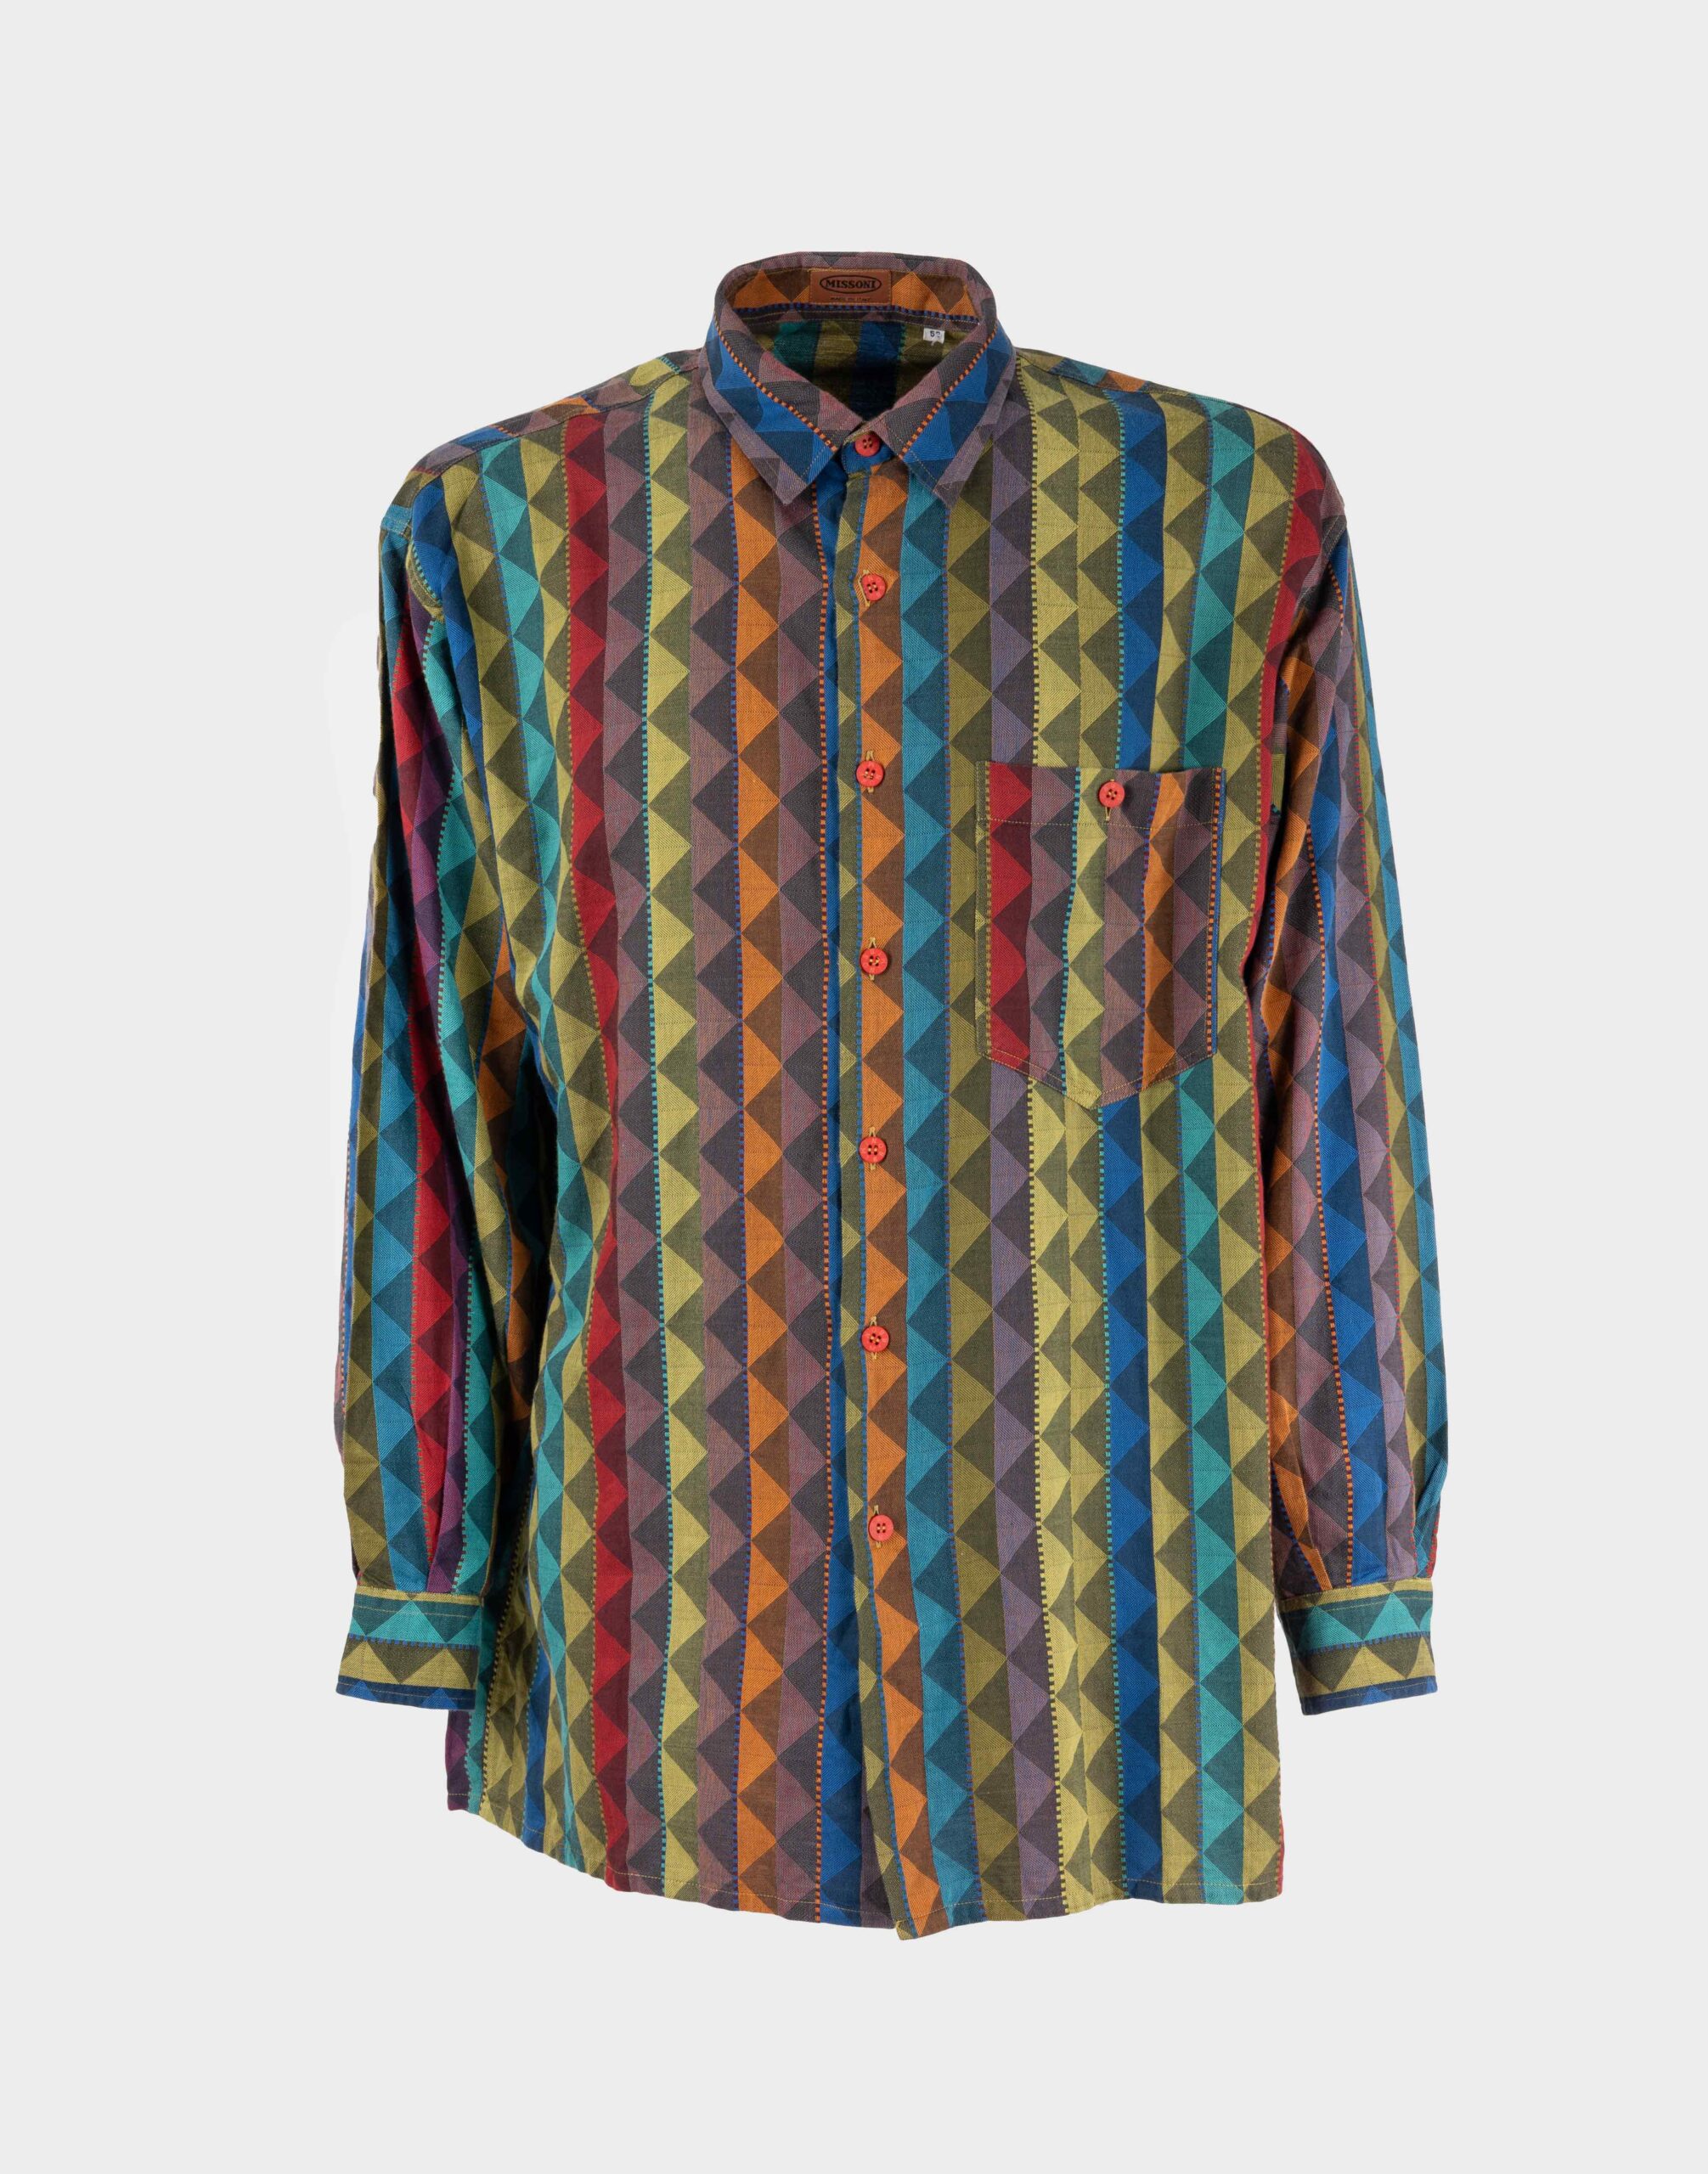 Men's Missoni long-sleeve shirt with colorful triangle pattern